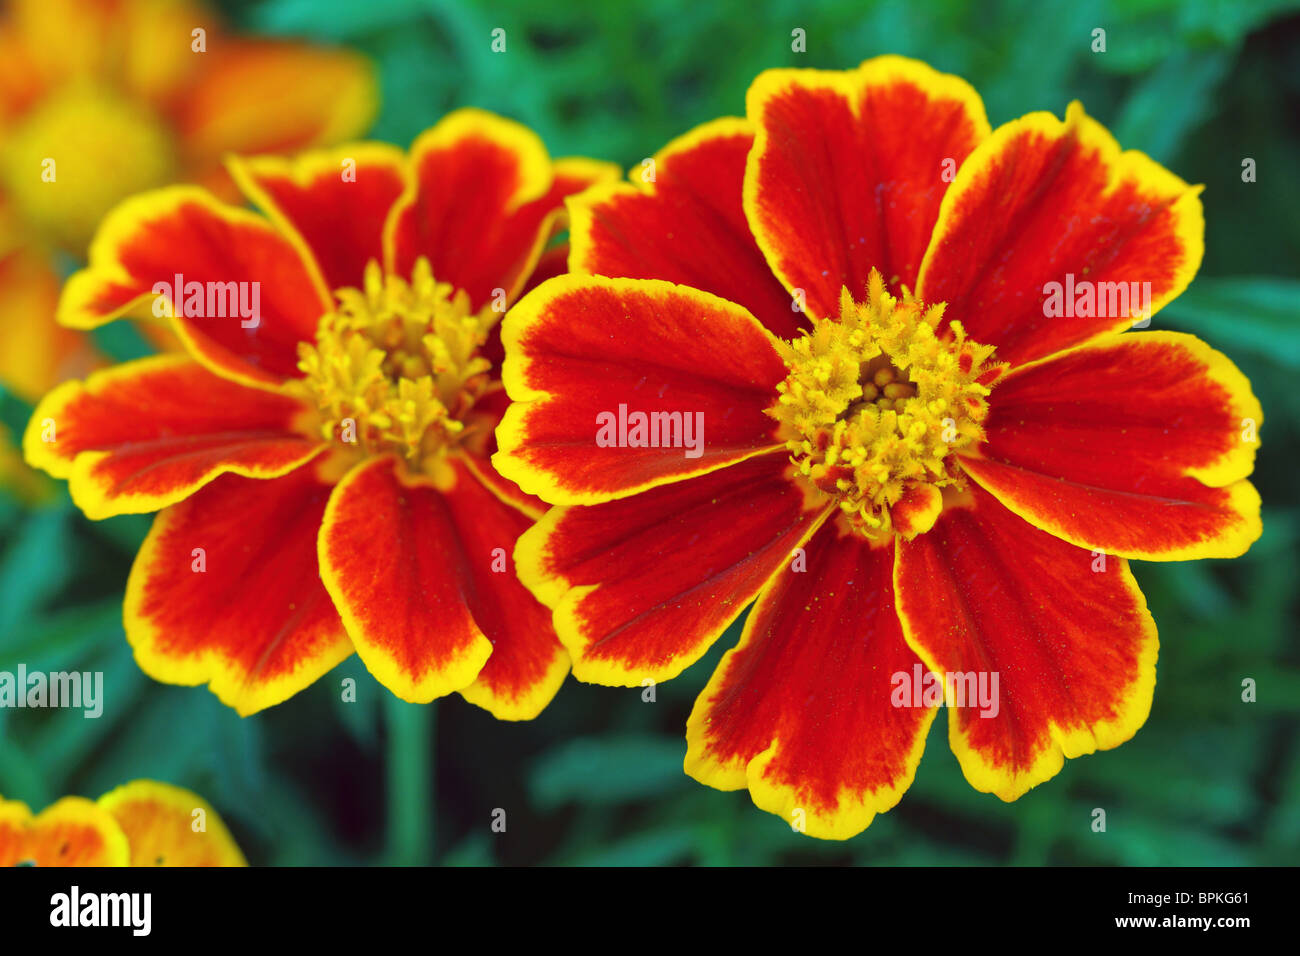 Two french marigolds flowers close up Tagetes Stock Photo